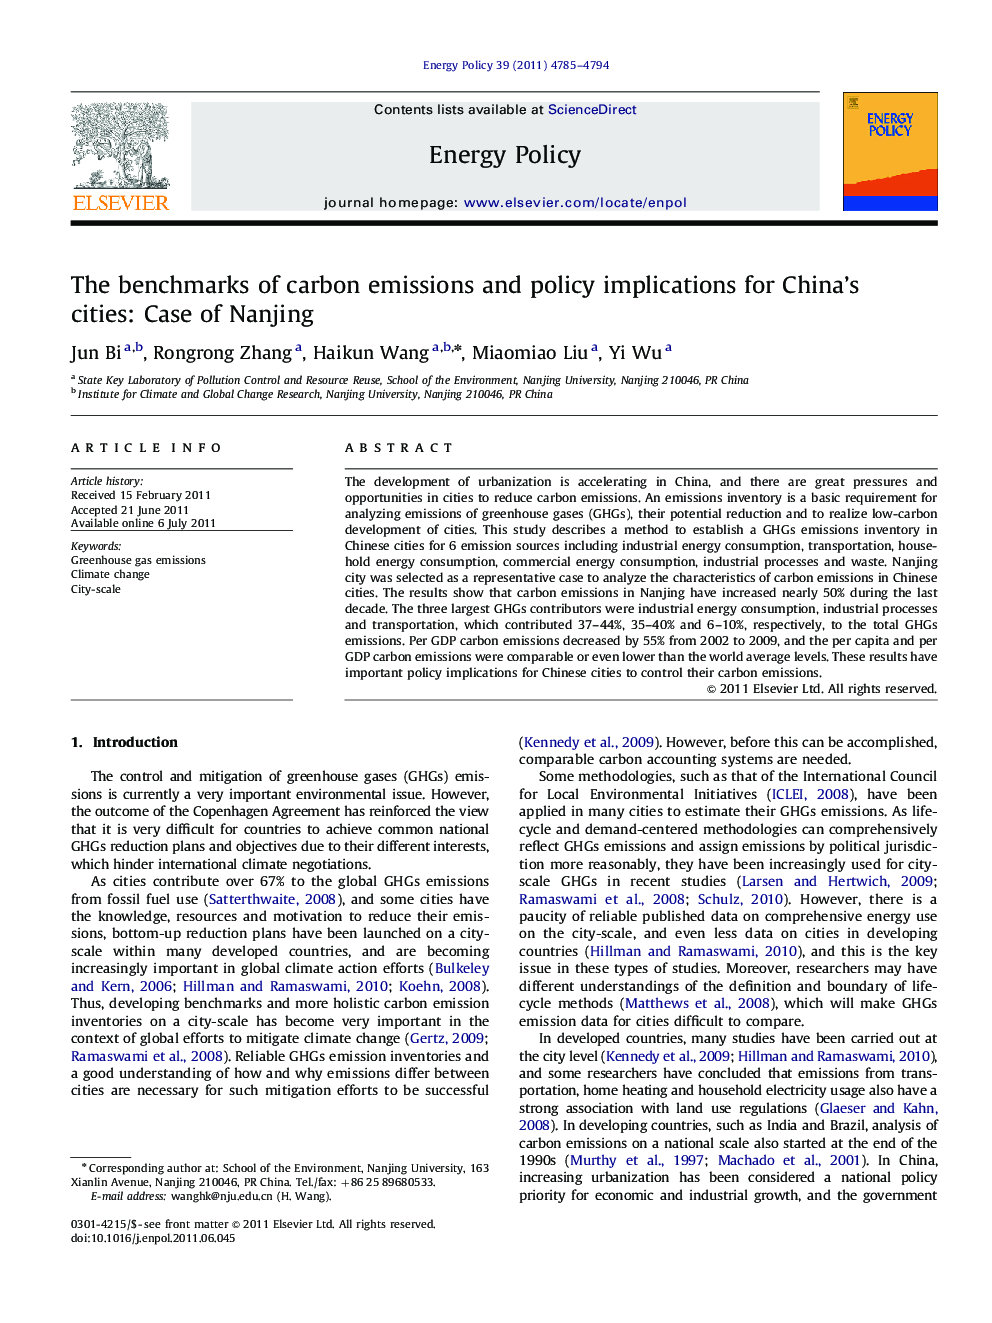 The benchmarks of carbon emissions and policy implications for China's cities: Case of Nanjing